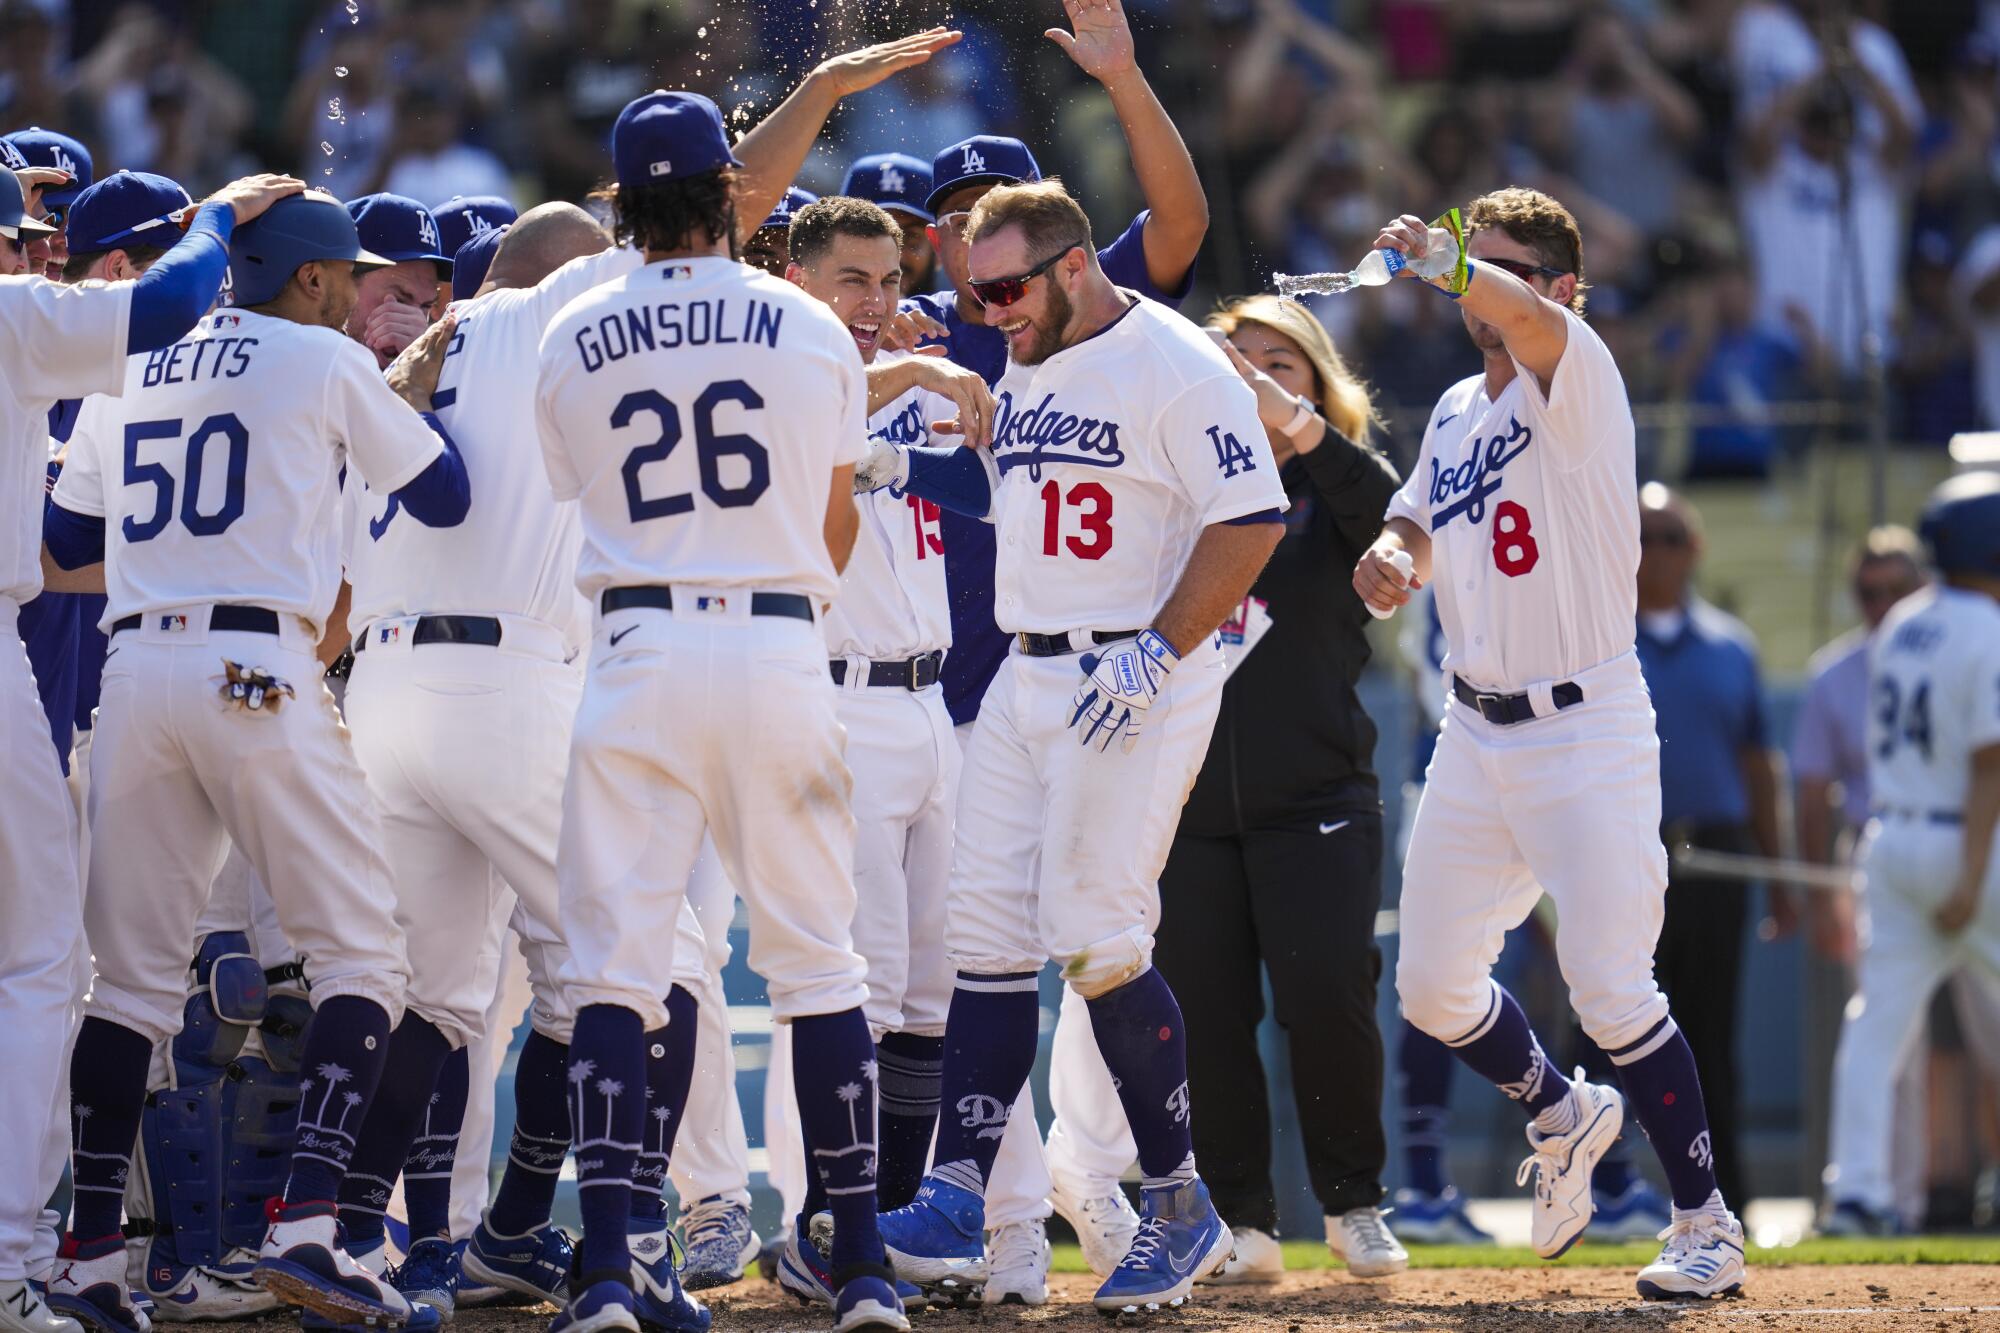 Max Muncy (13) celebrates with his Dodgers teammates after hitting a walk-off home run in a 7-4 victory.